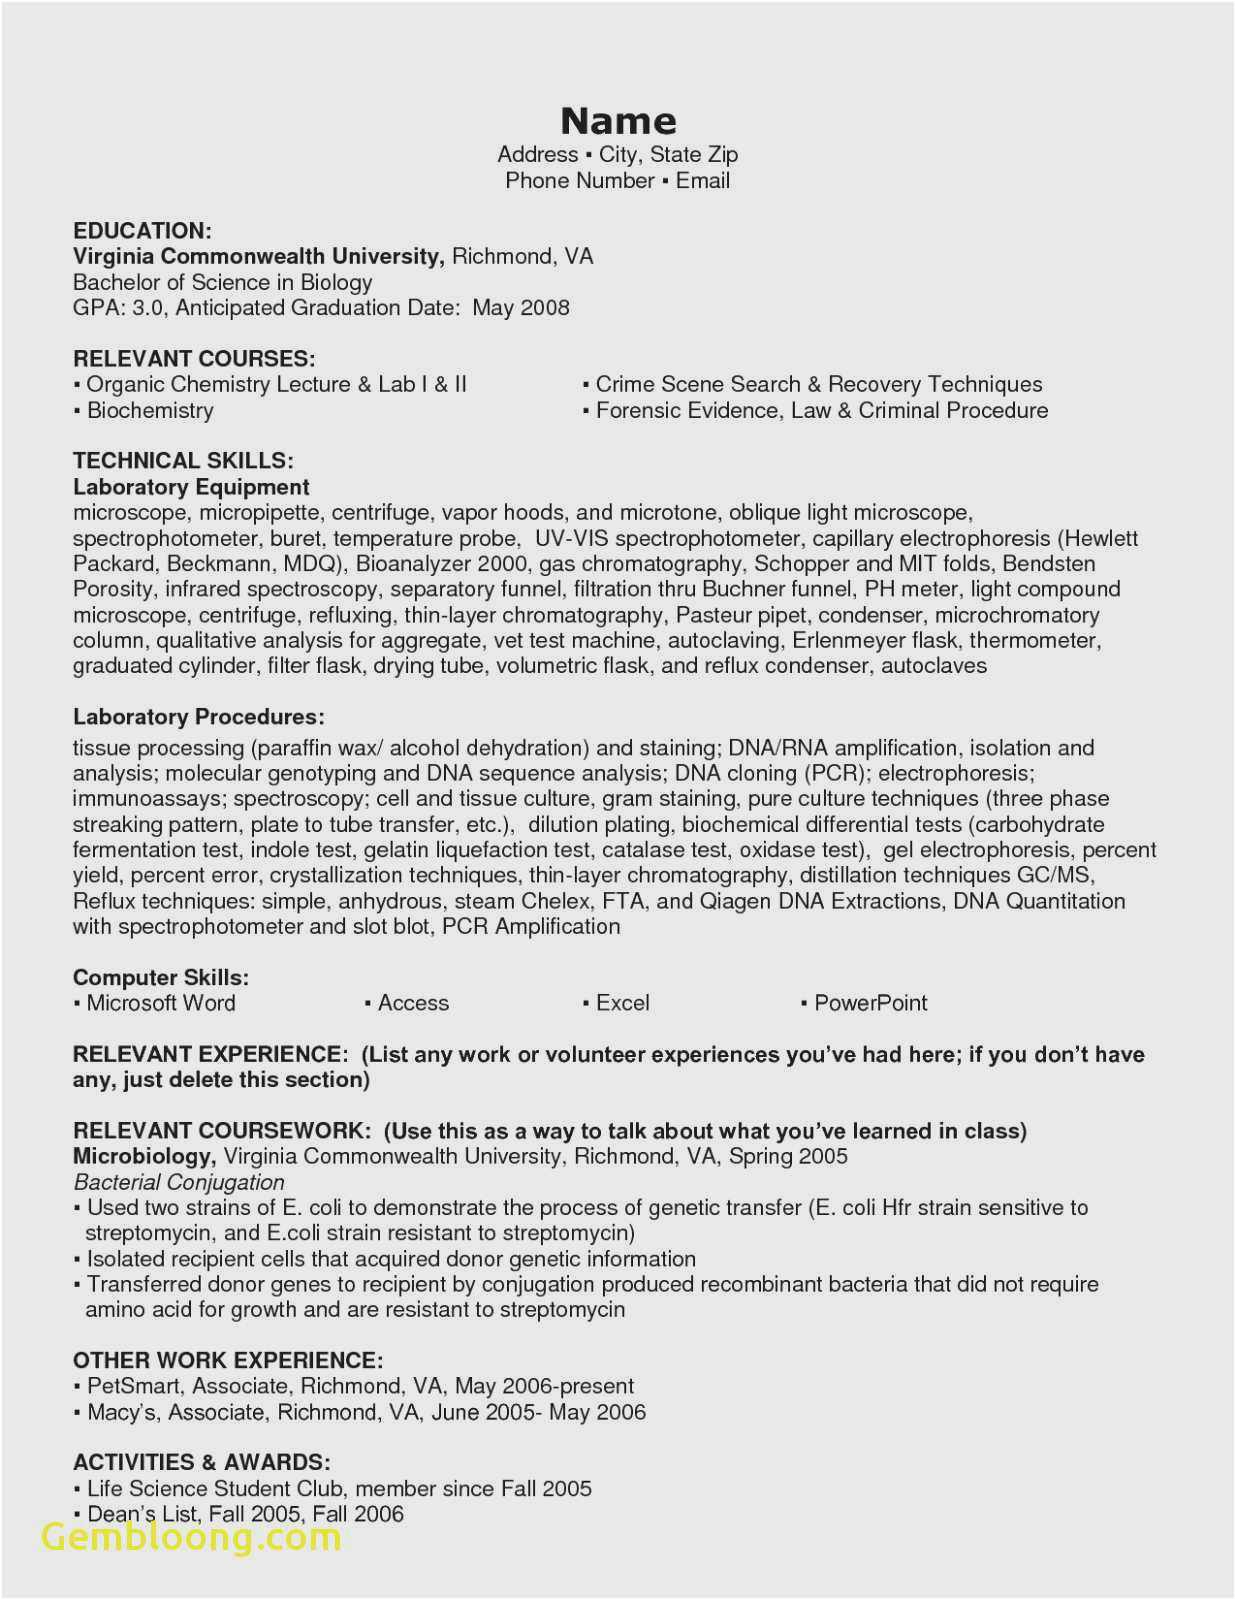 Sample Resume Relevant Skills and Experience Free Free Download 56 Relevant Experience Resume Picture